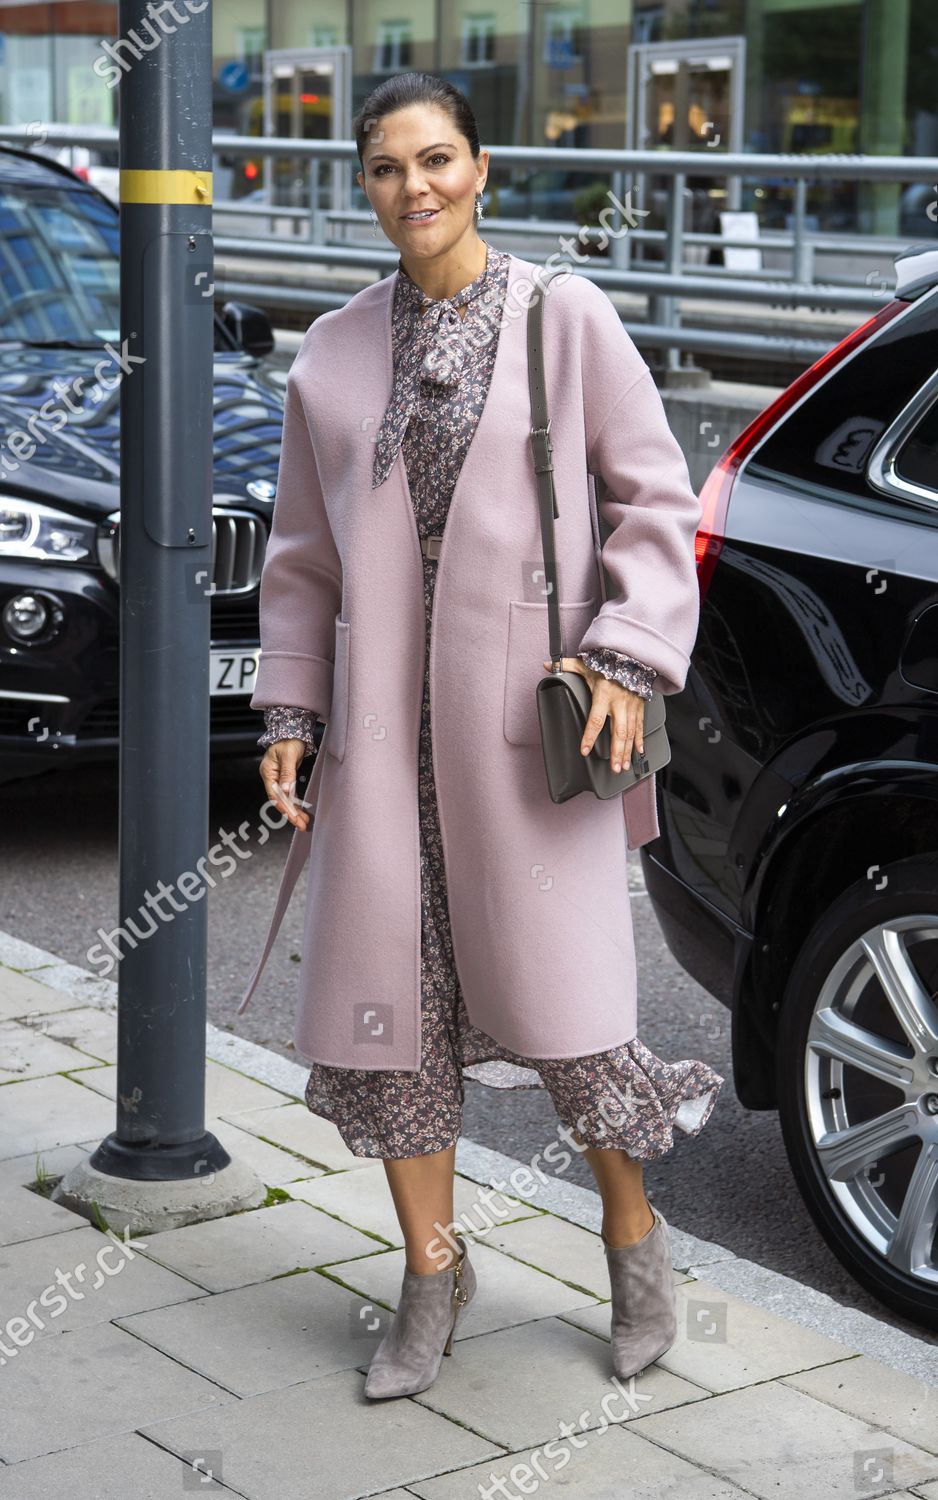 crown-princess-victoria-attends-inauguration-of-a-sculpture-depicting-childrens-book-author-astrid-lindgren-astrid-lindgren-childrens-hospital-solna-outside-stockholm-sweden-shutterstock-editorial-10945887b.jpg